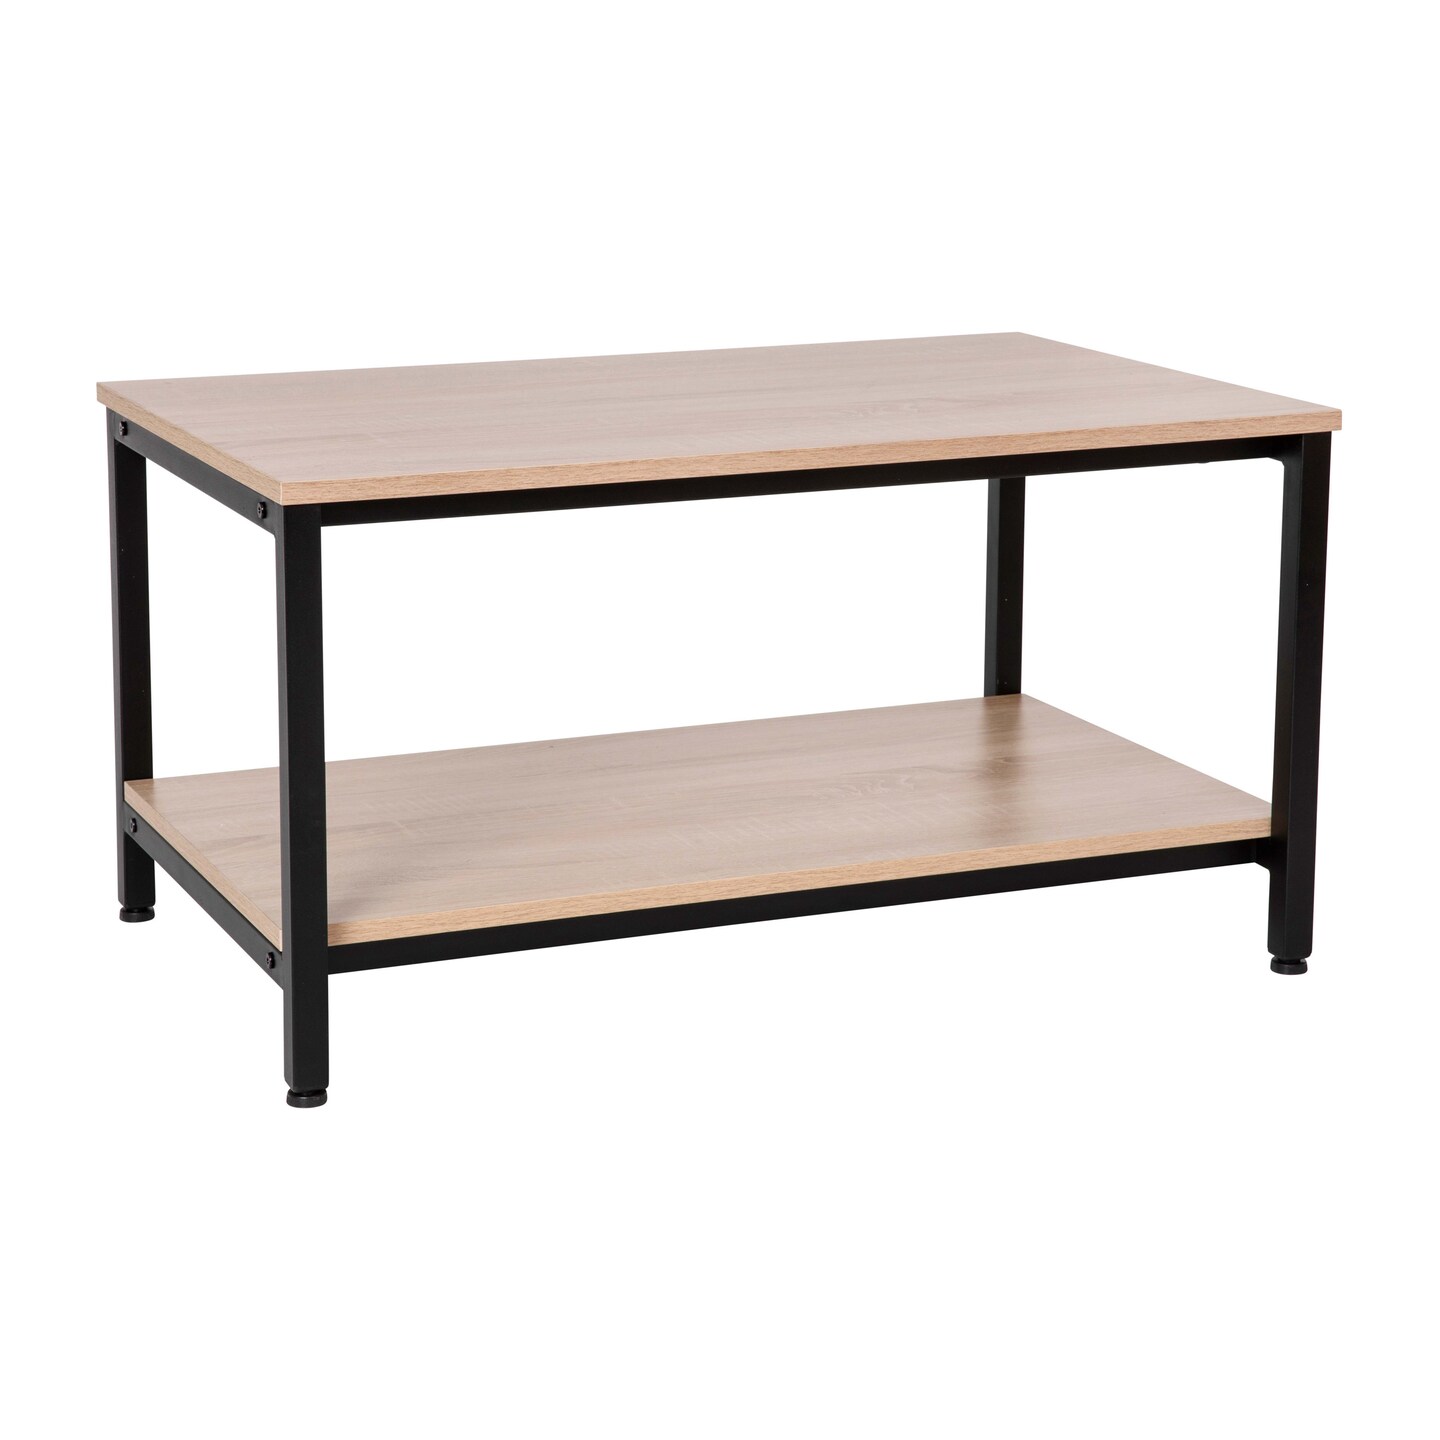 Merrick Lane Bromwell Coffee Table Rustic and Metal Frame Coffee Table With Storage